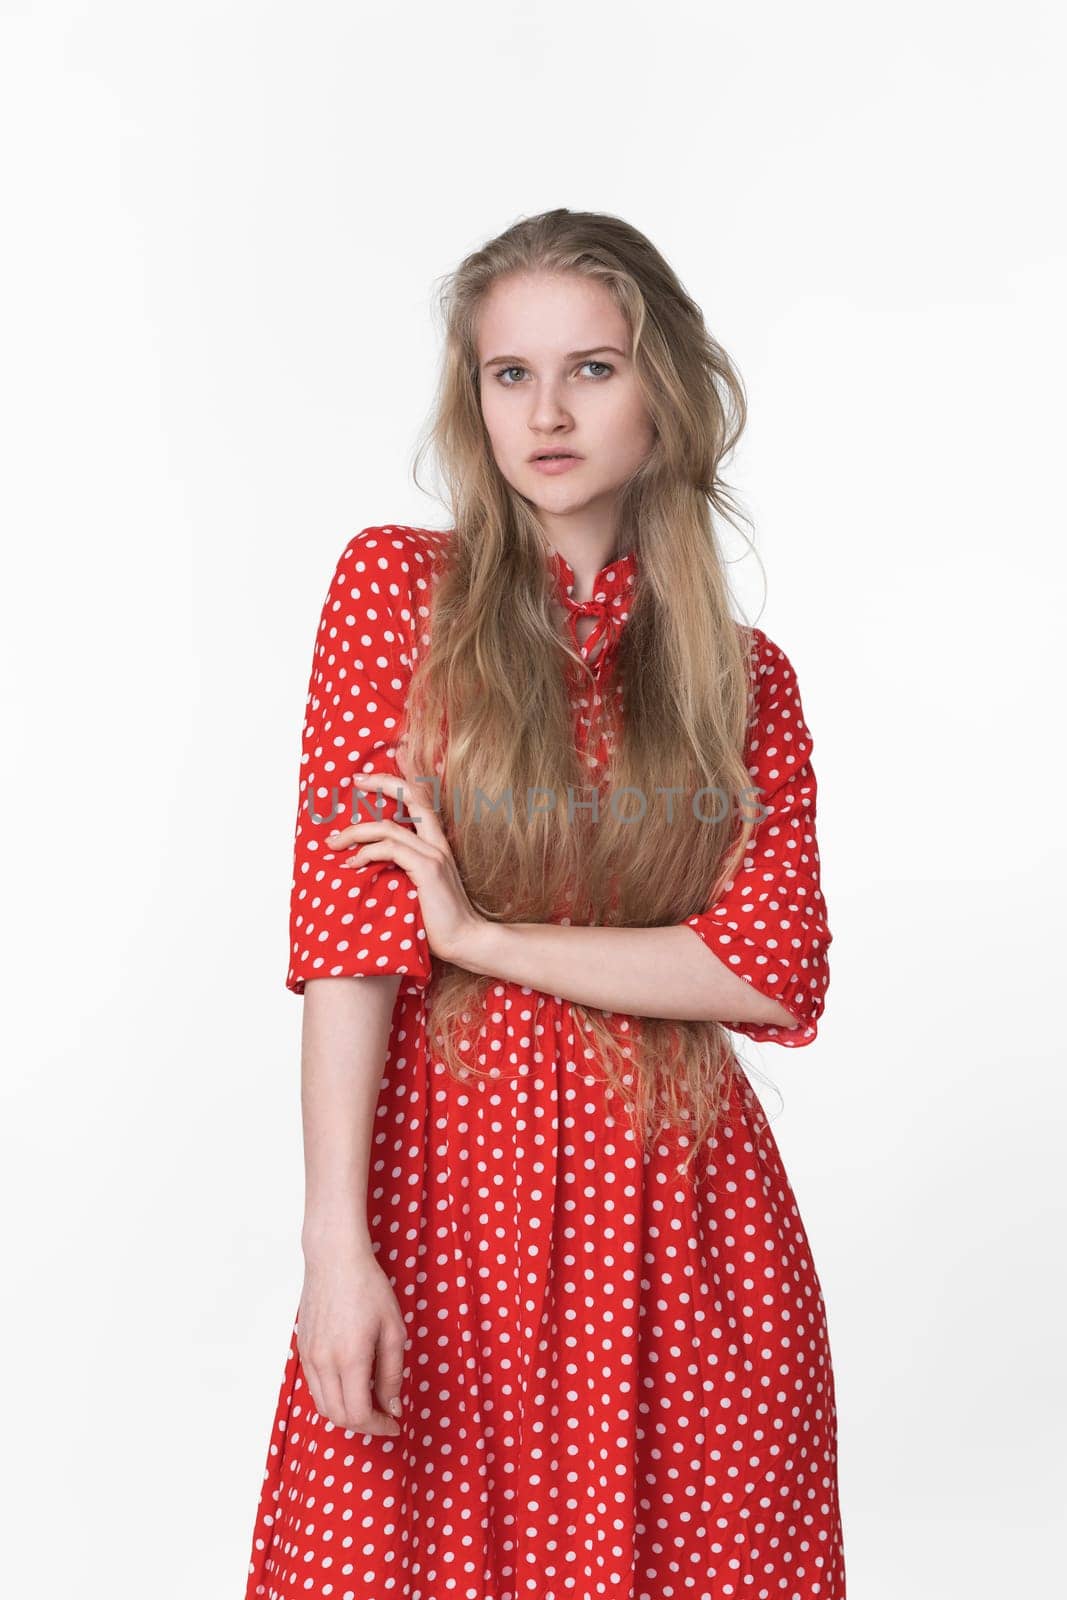 Fashionable blonde woman with long hair dressed in summer polka dot dress poses on white background by Alexander-Piragis